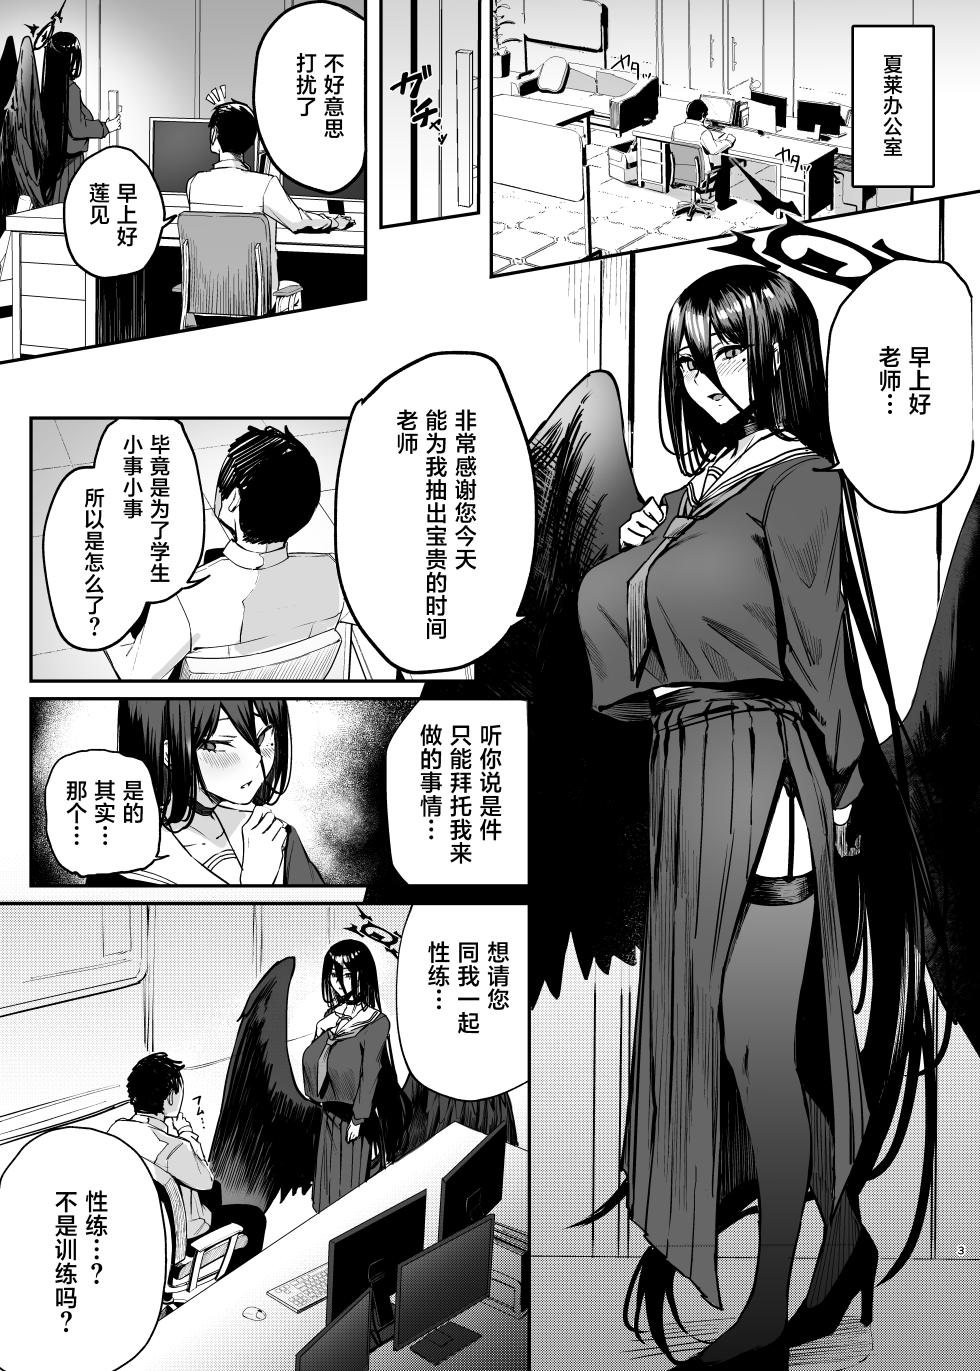 [Panna Cotta (Mitsuki)] EXERCISE SEXERCISE (Blue Archive)  [Chinese] [葱鱼个人汉化] [Digital] - Page 2